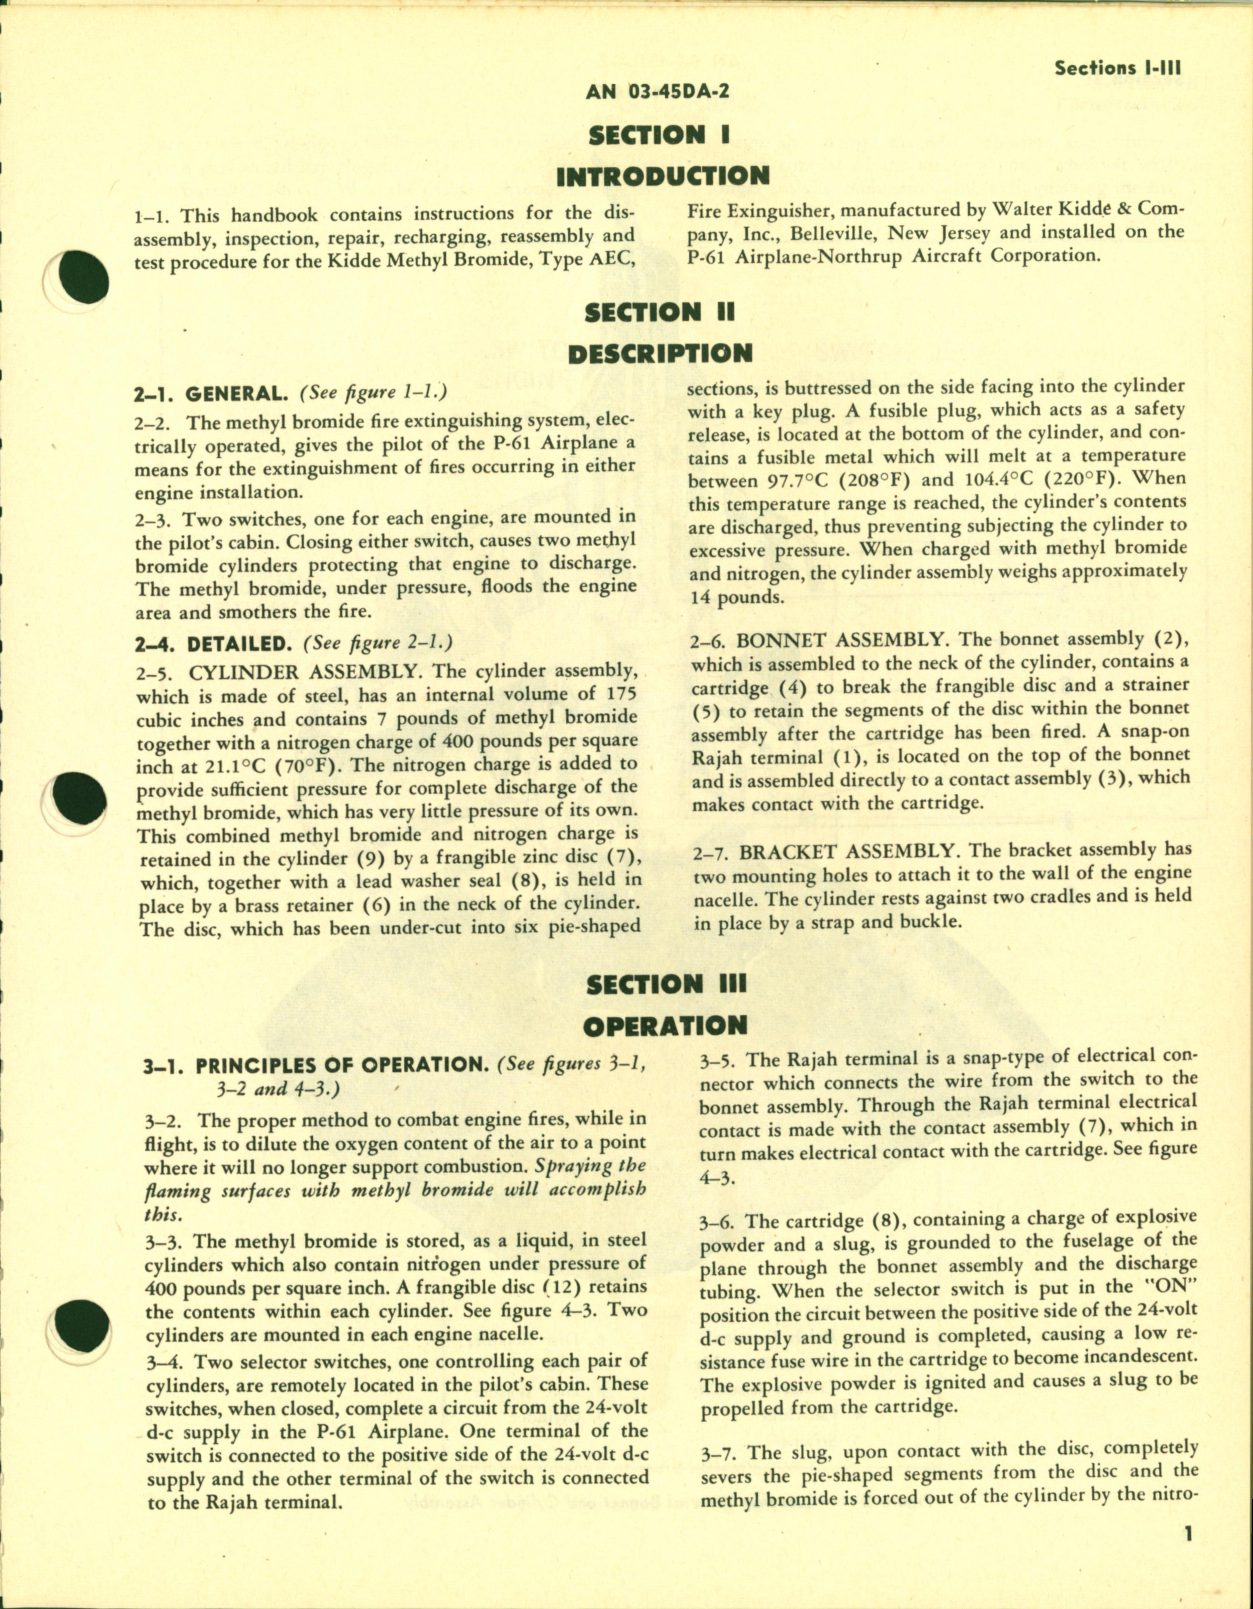 Sample page 5 from AirCorps Library document: Overhaul Instructions for Methyl Bromide Fire Extinguisher Type AEC